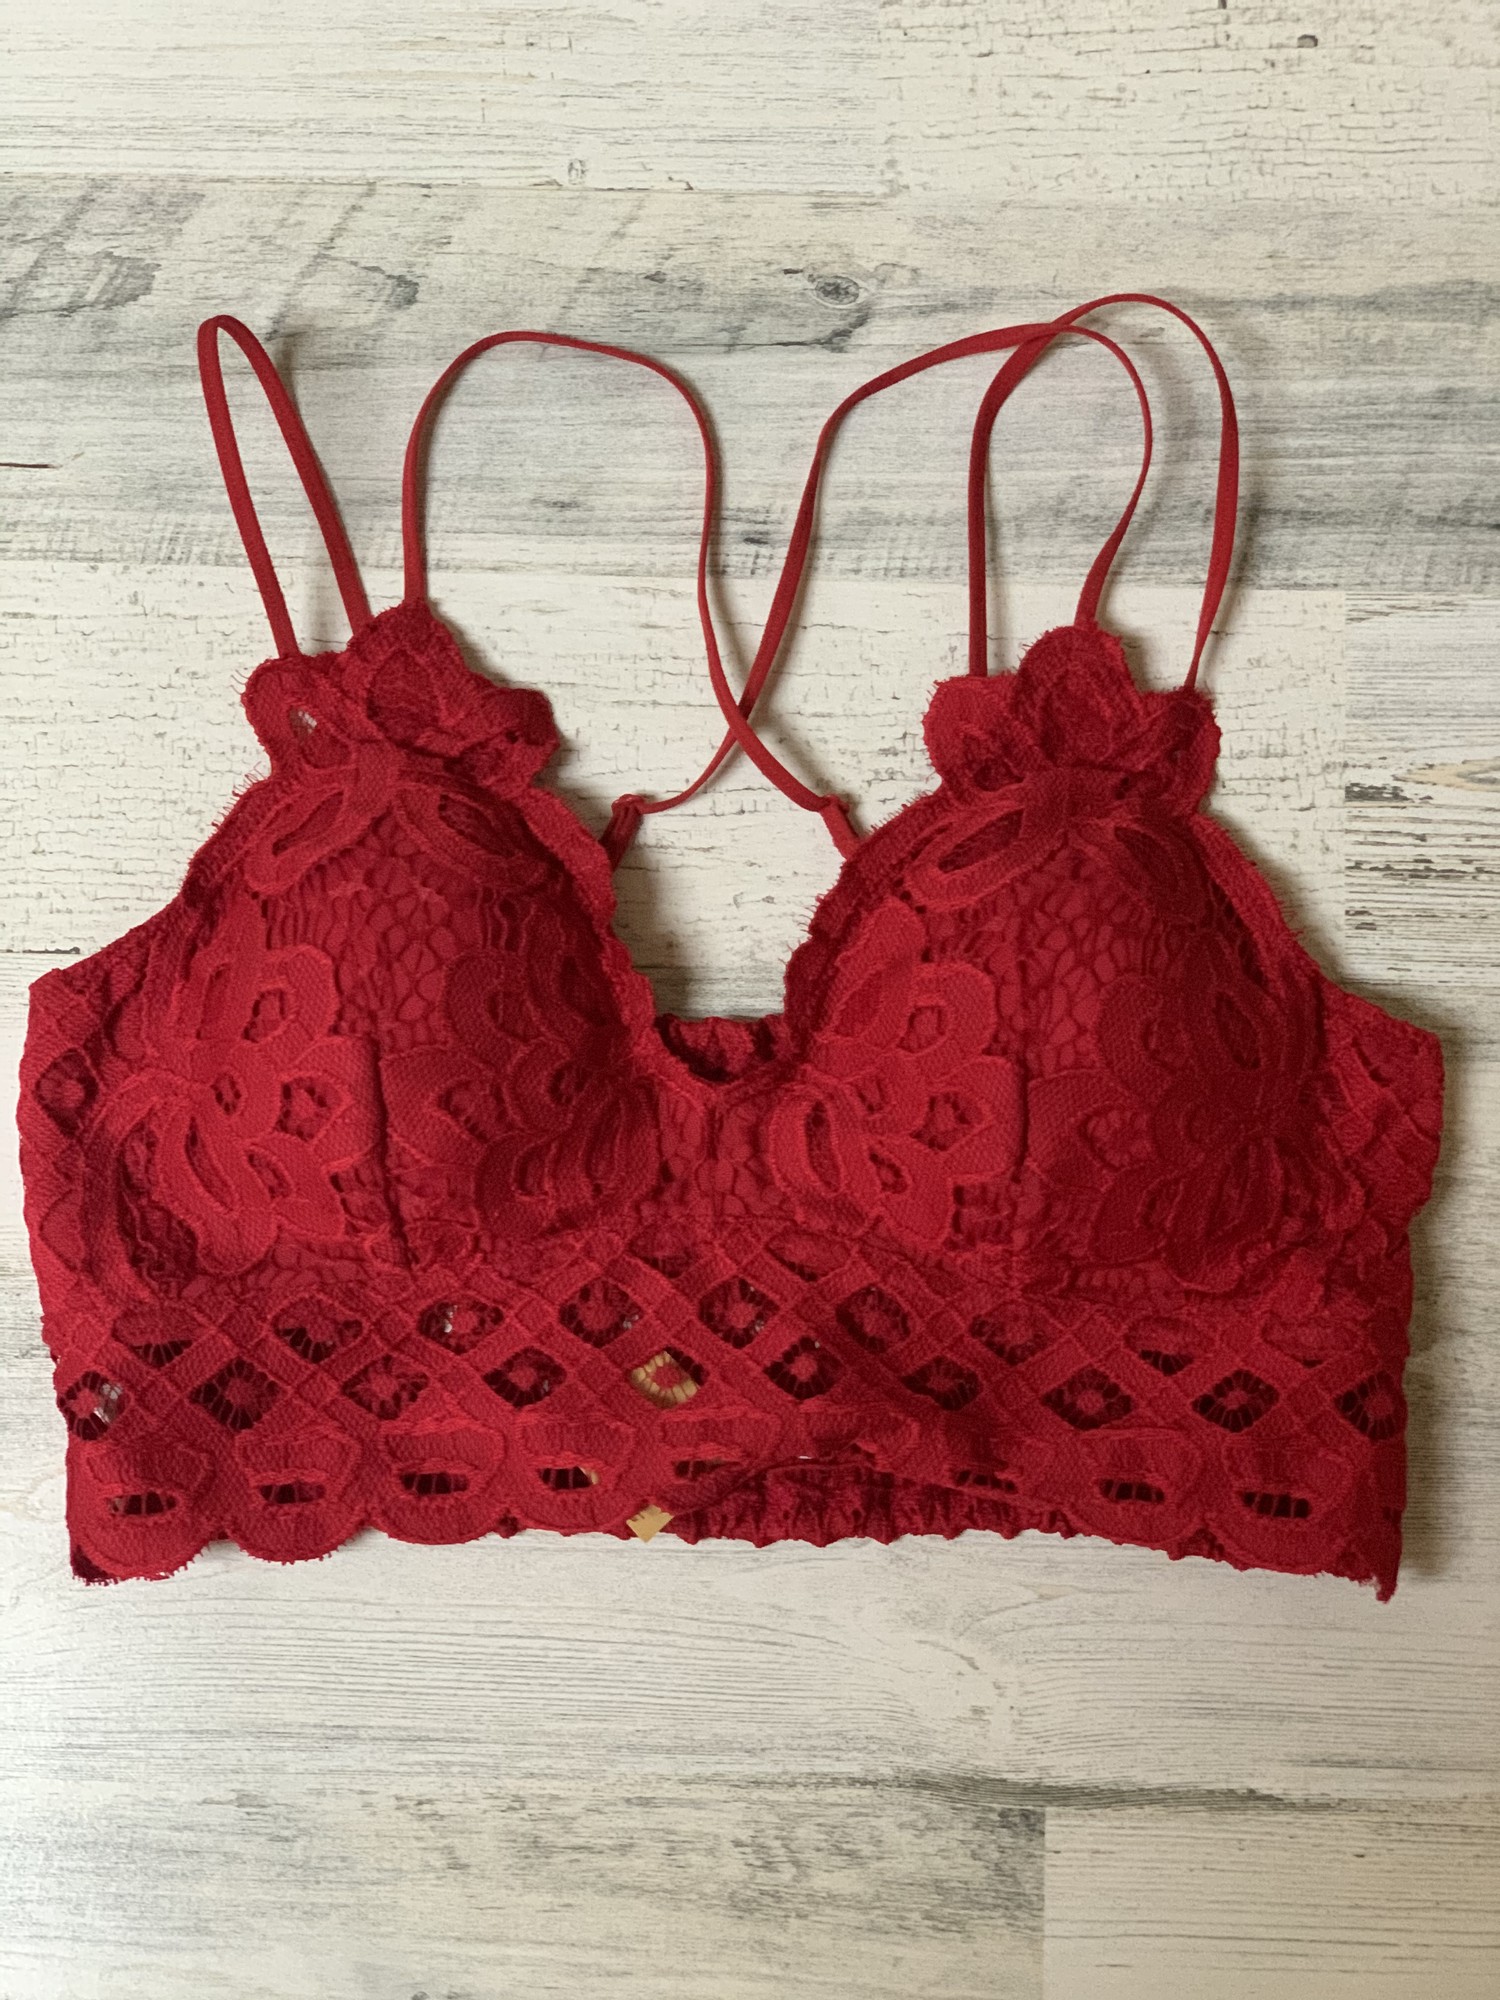 Red Scalloped Lace Bralette
Size (S)